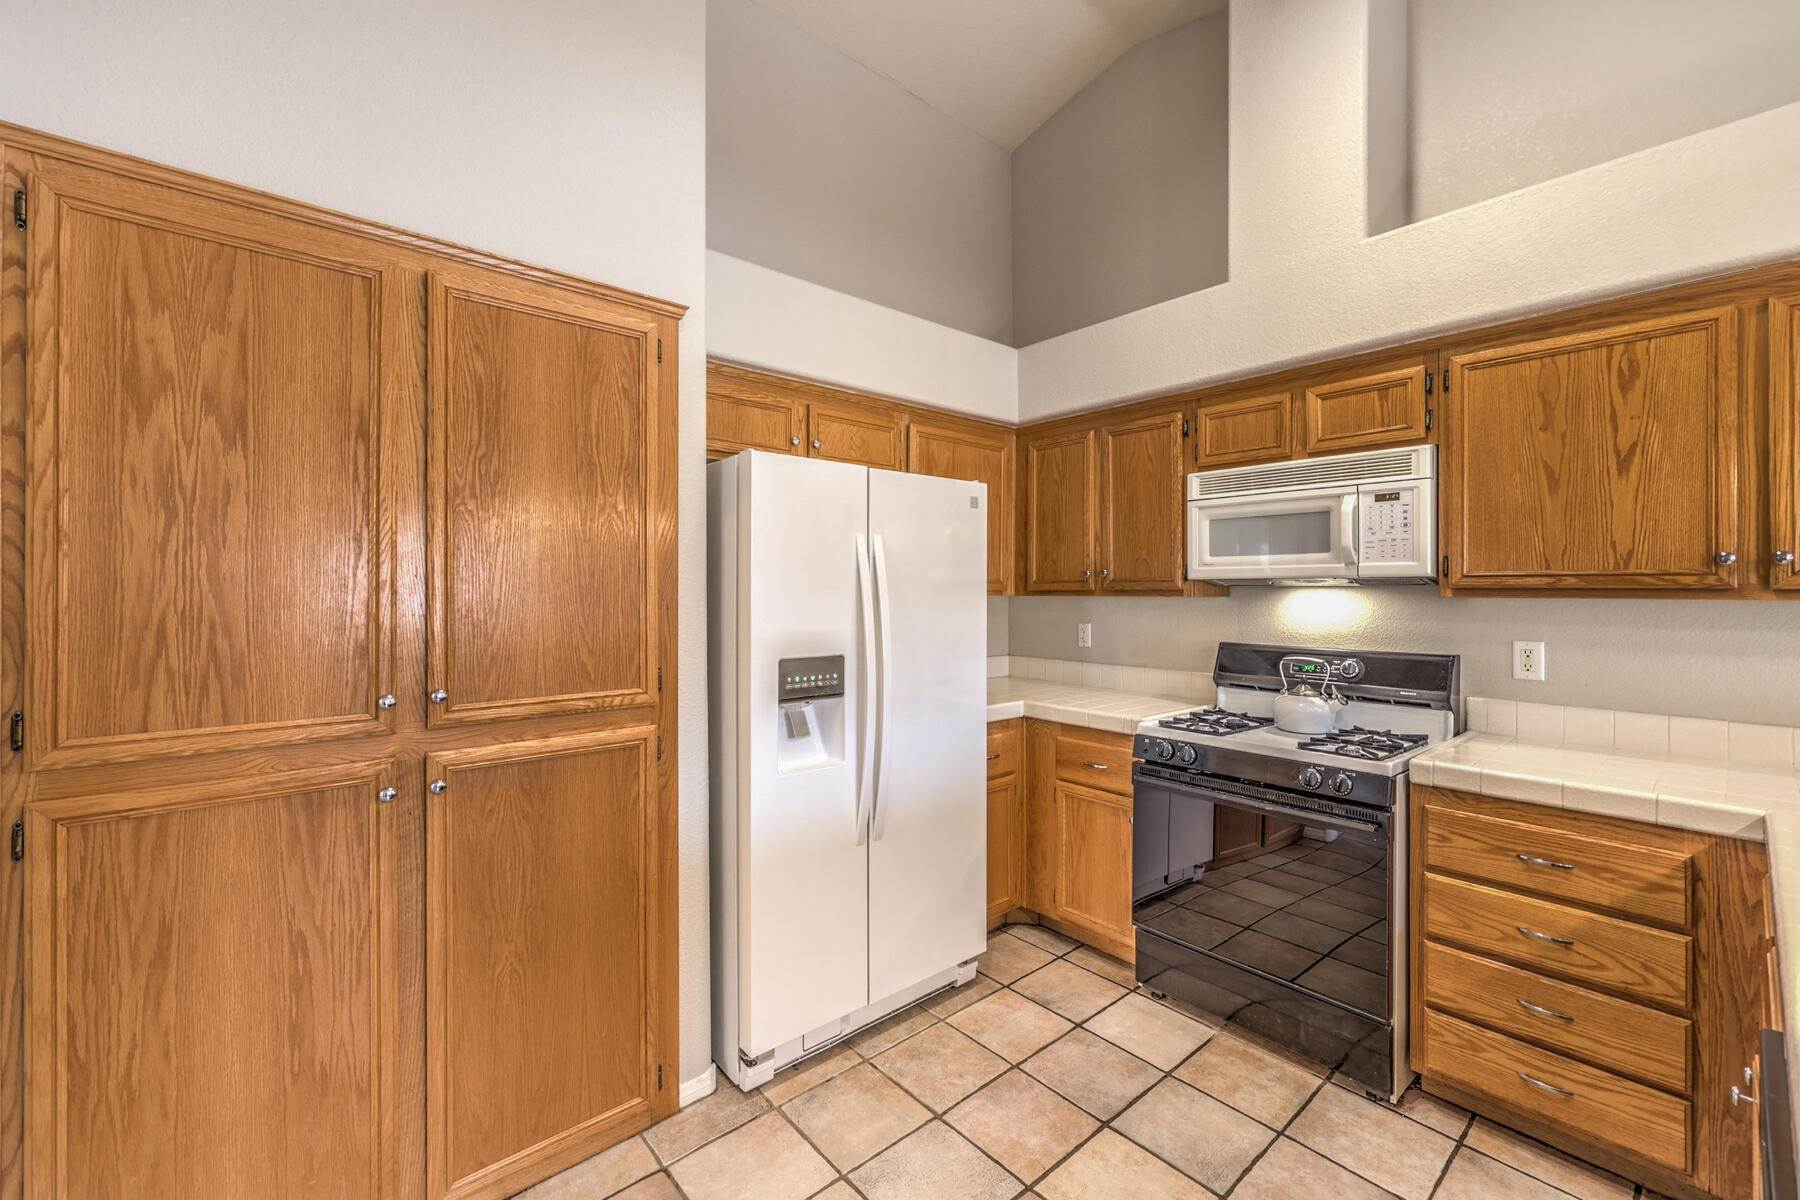 16. Townhouse at 2035 E Warm Springs Rd, #1029 Las Vegas, Nevada 89119 United States